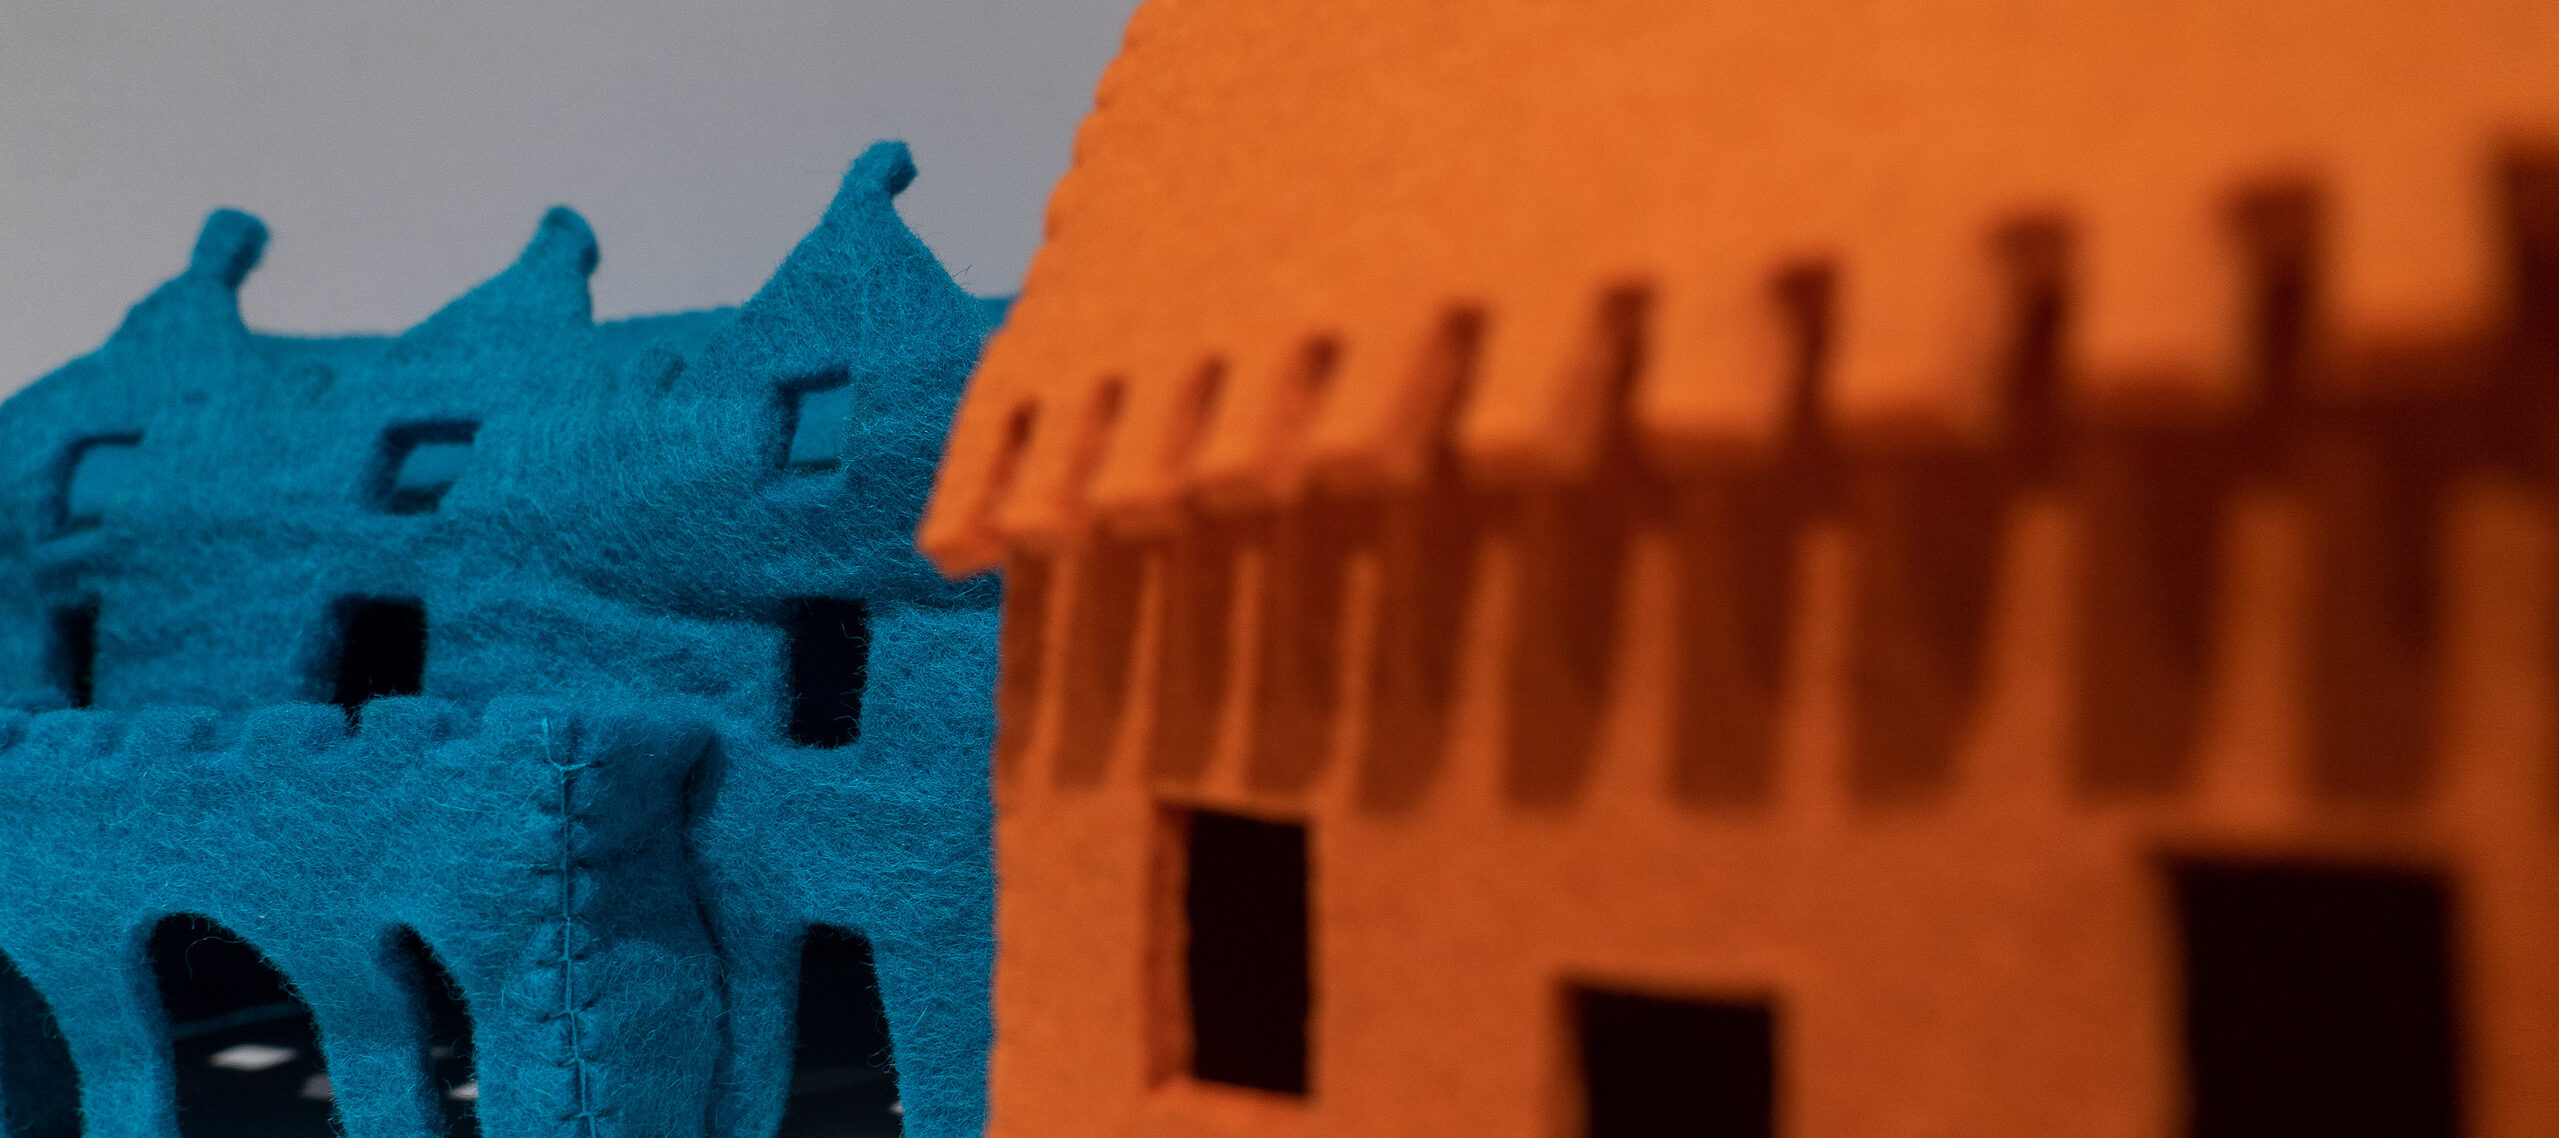 Close-up detail of a larger artwork features a view of two felt houses. On the viewer's right is an orange house that is out-of-focus while on the left is a blue house that is in-focus and has visible stitches, coarse texture, and rectangular windows.